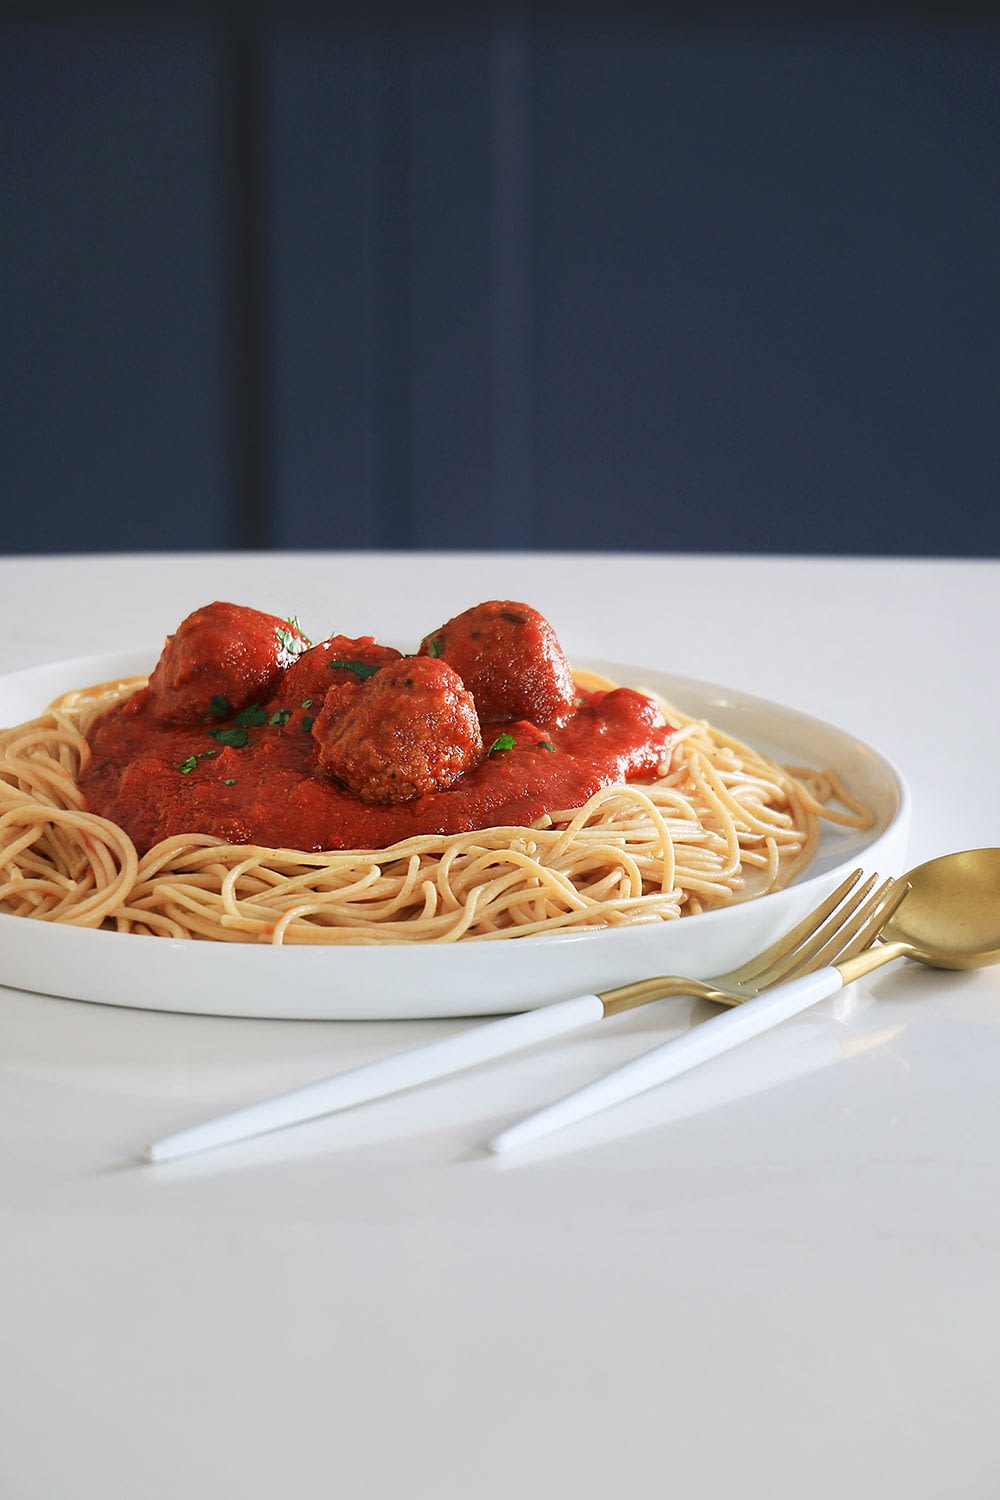 Spaghetti with sauce and meatballs